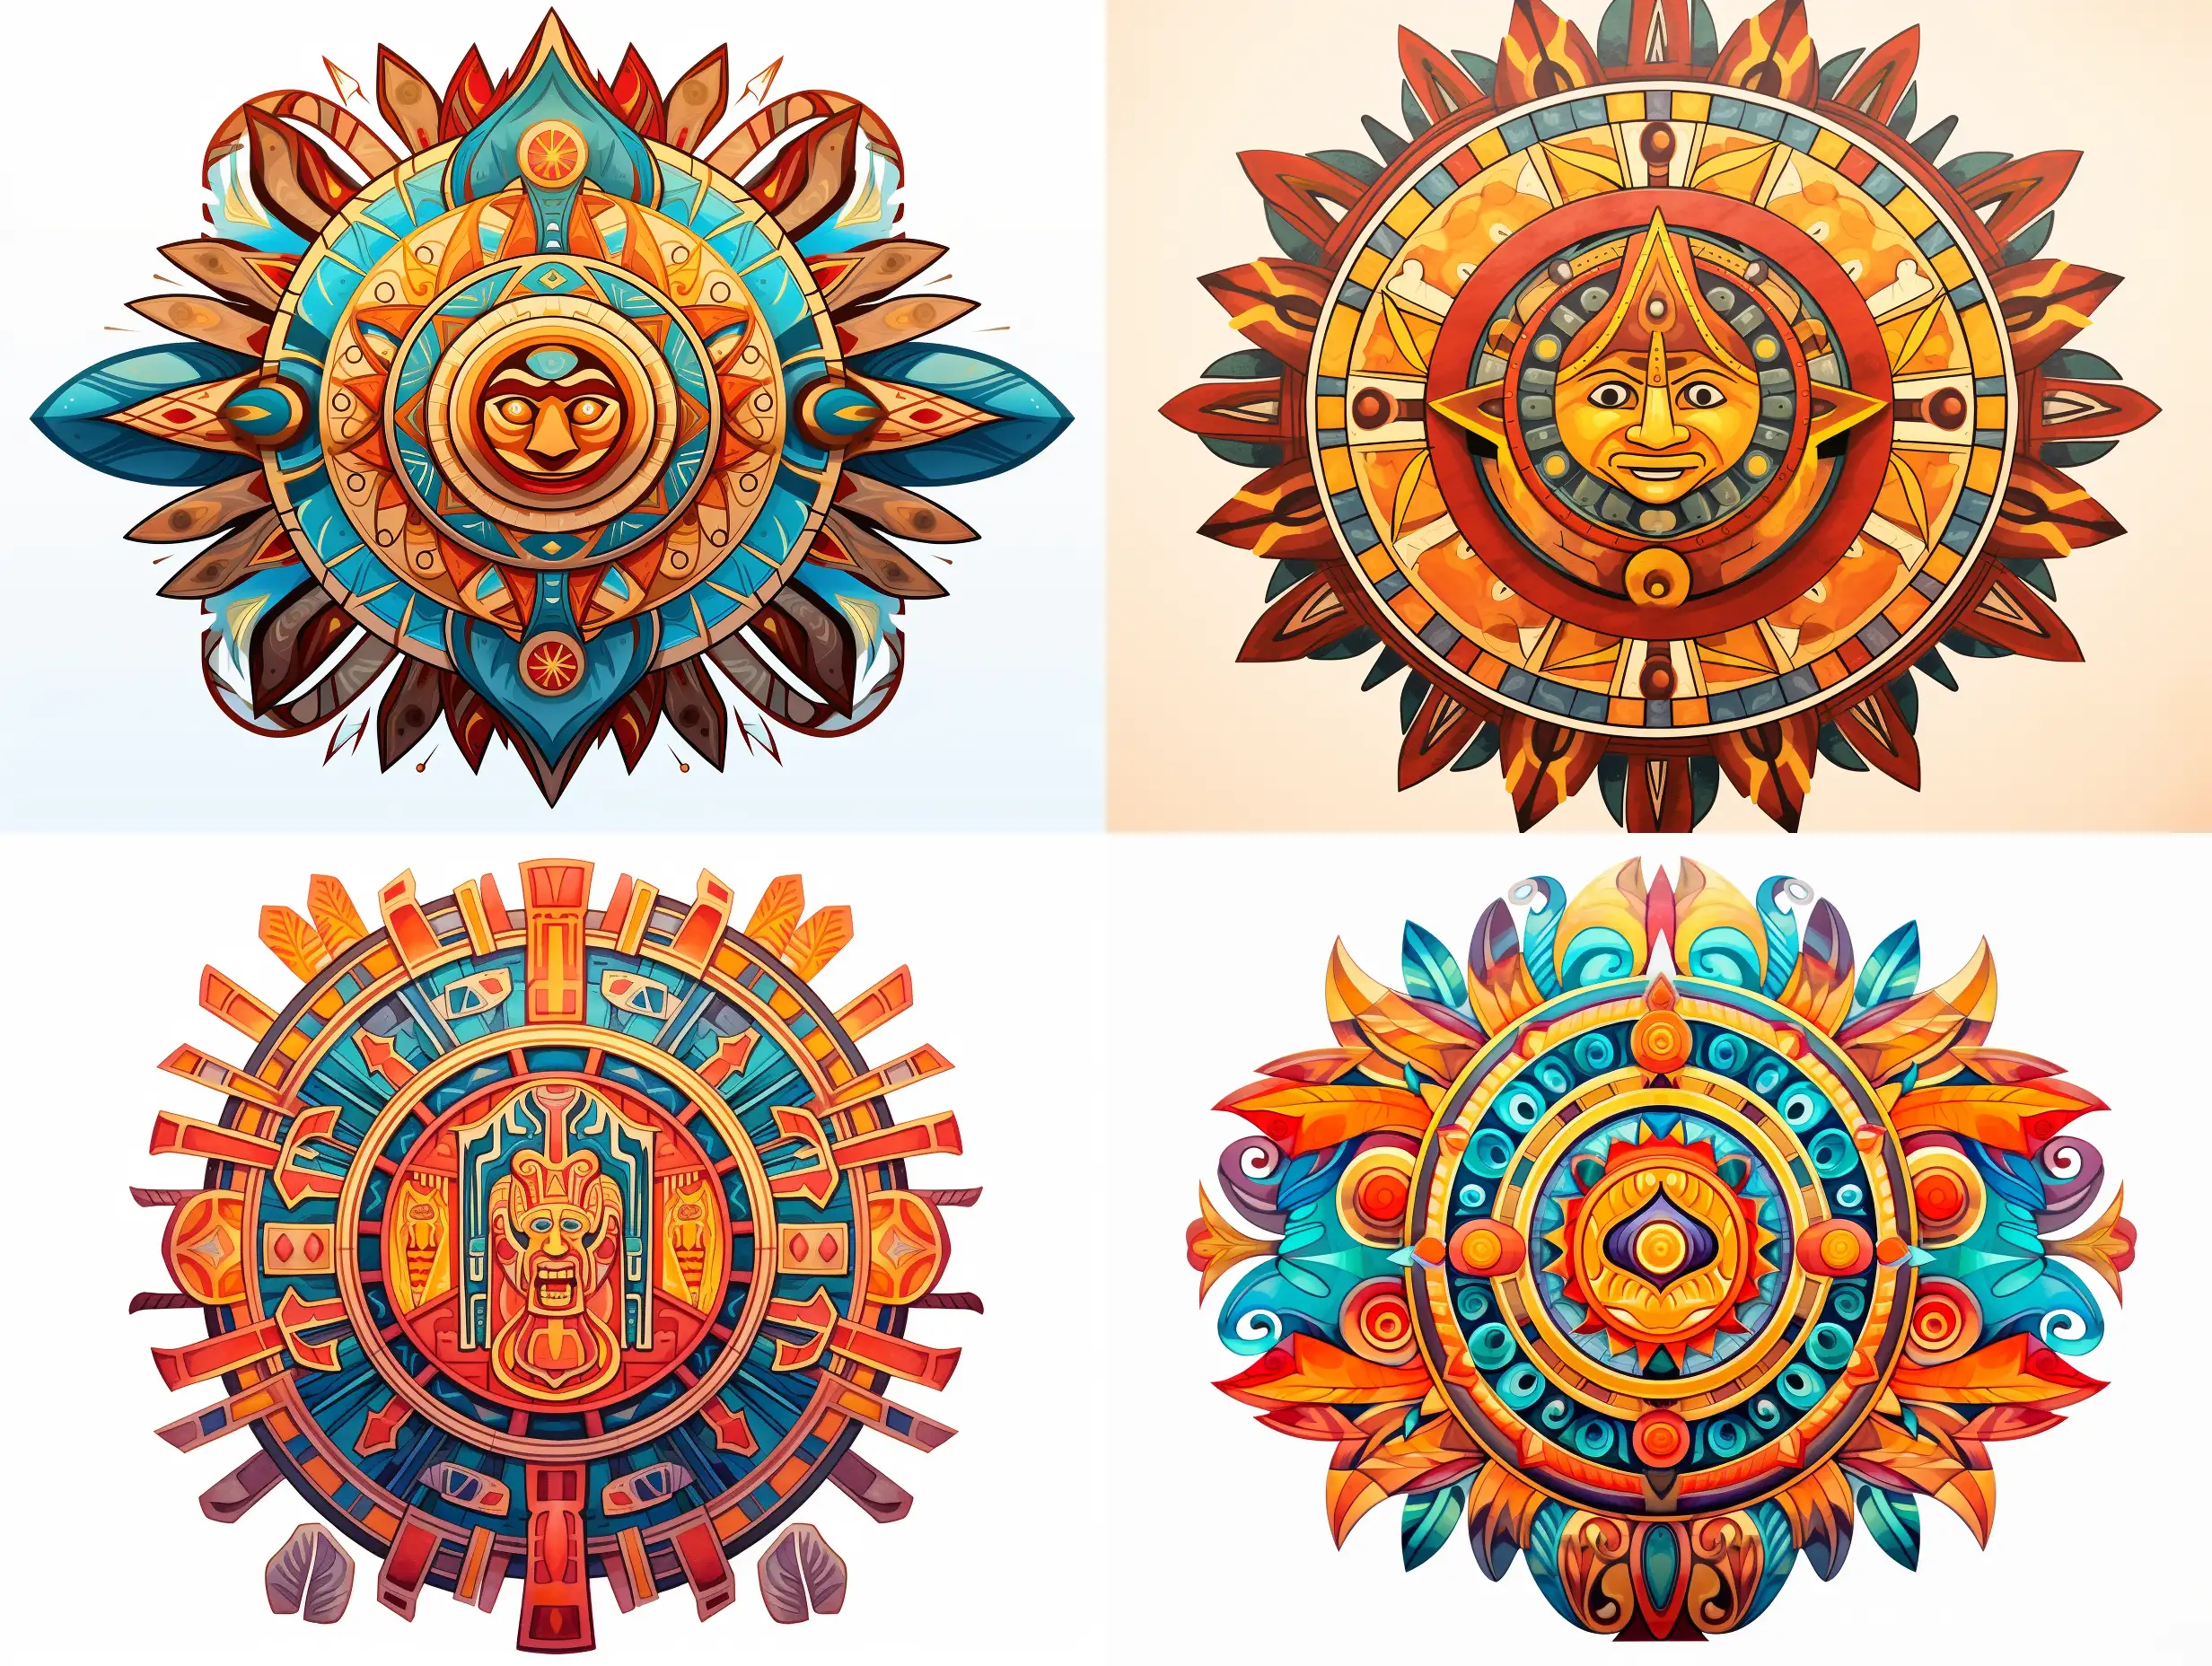 Ancient-Shields-A-Vibrant-Stylized-Caricature-by-Victor-Ngai